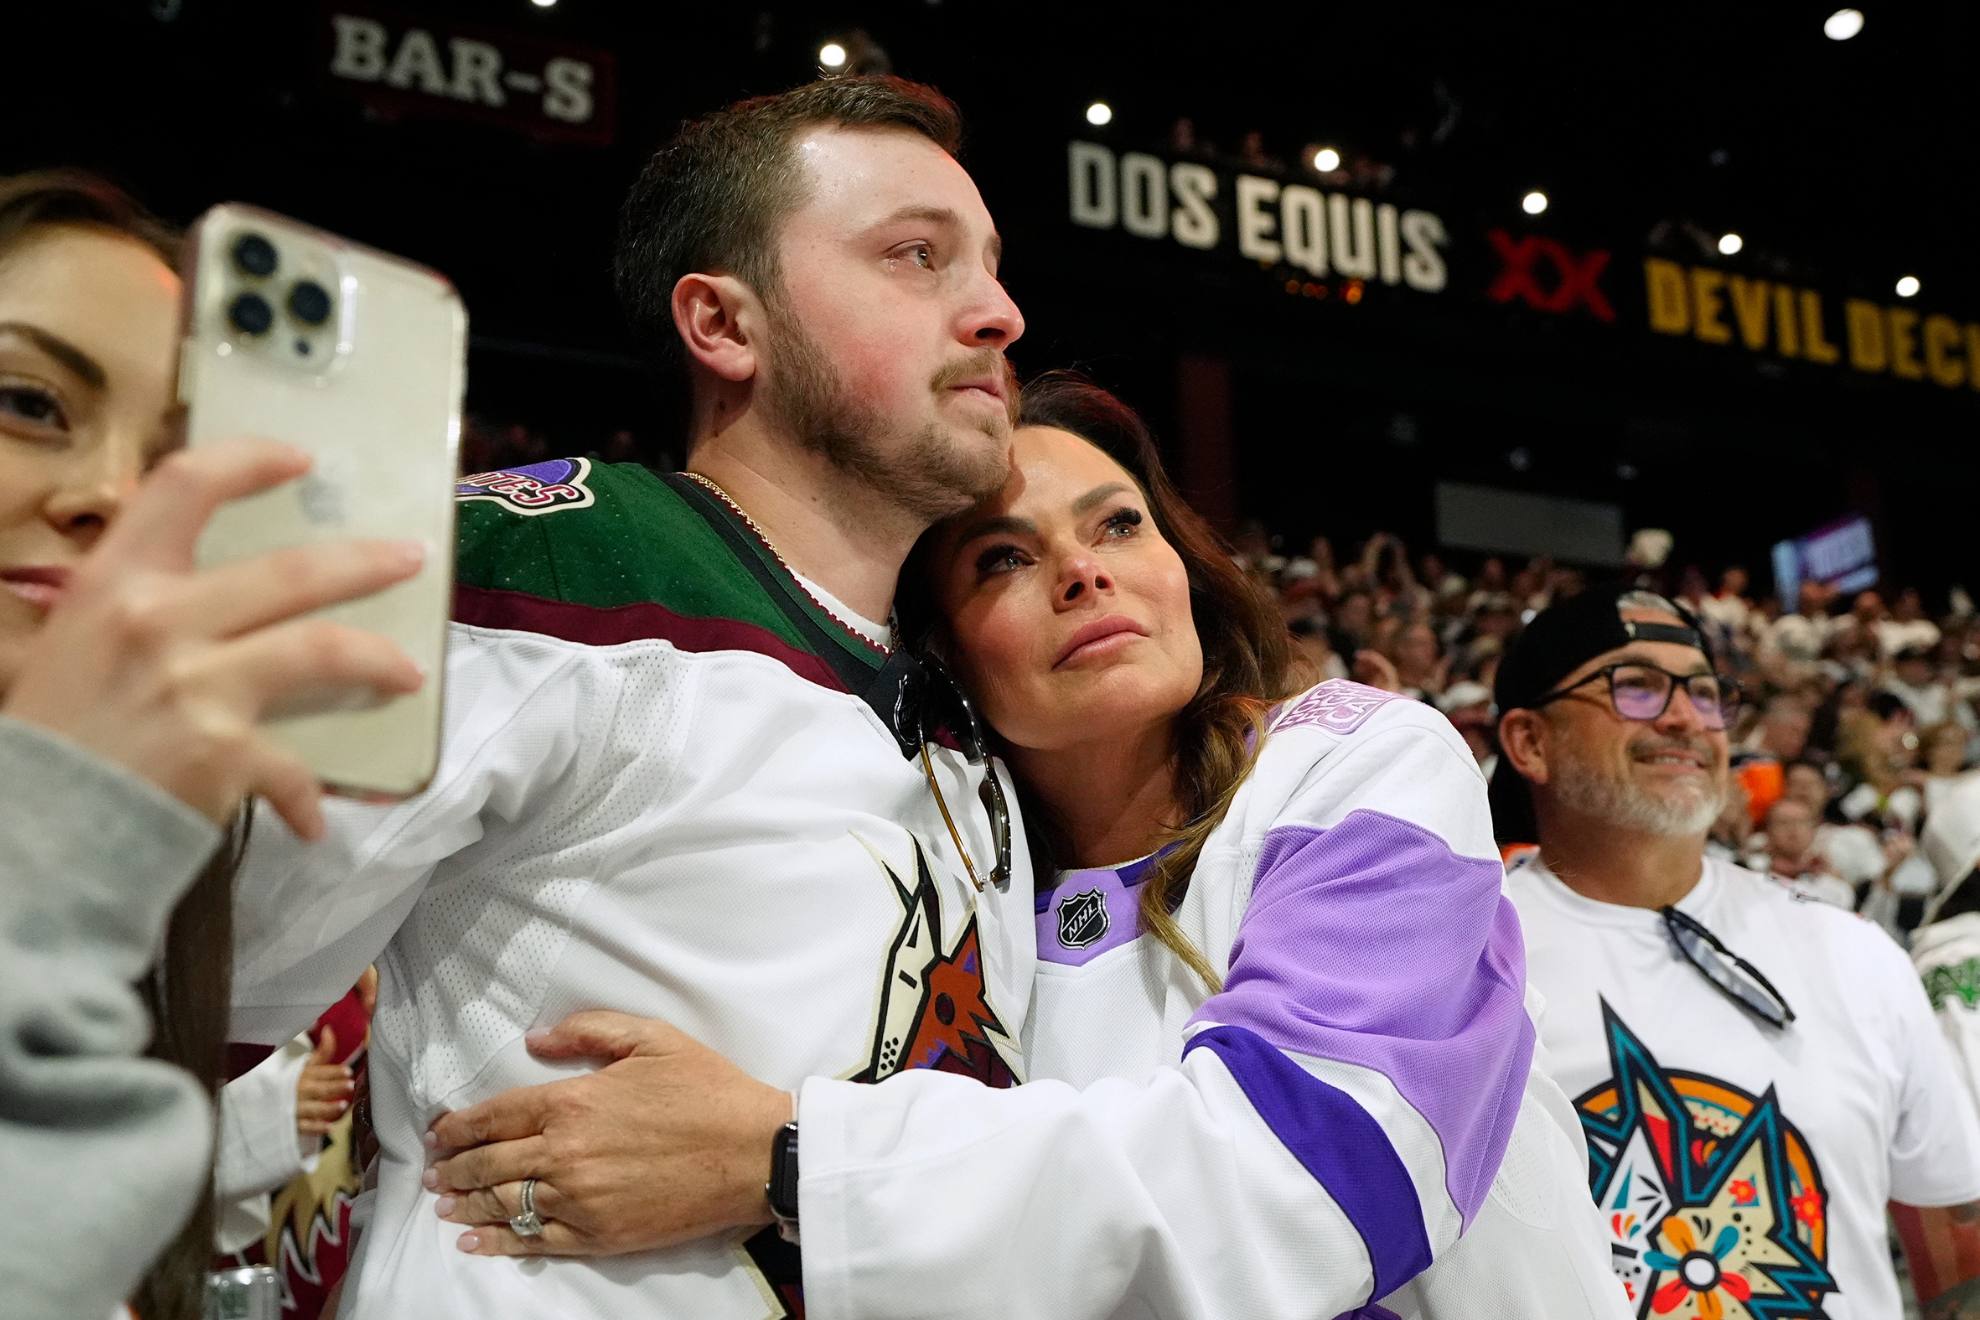 Arizona Coyotes forced to relocate after heartbreaking final game in the desert